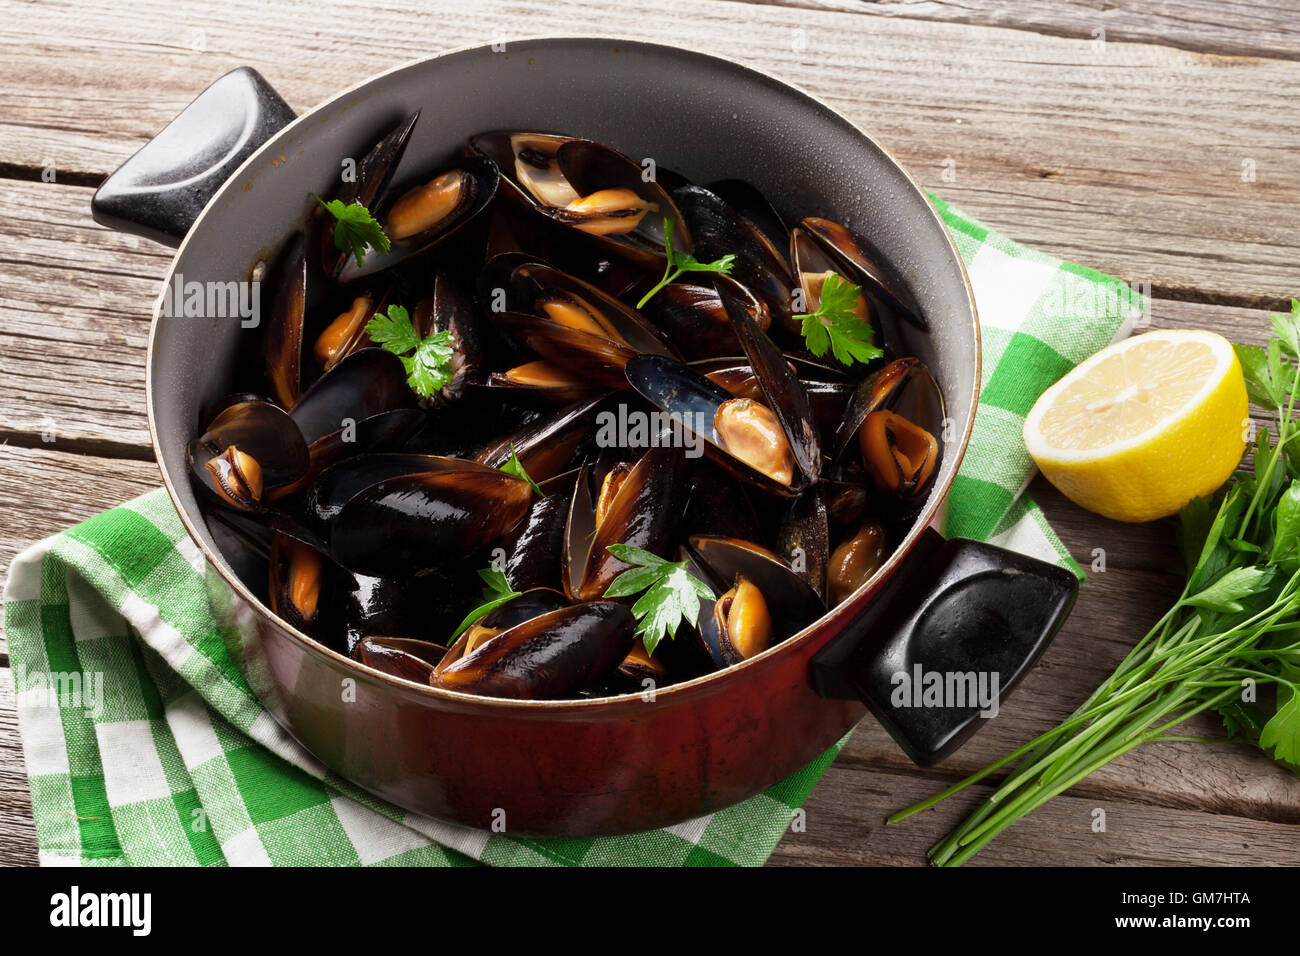 Mussels in copper on wooden table Stock Photo